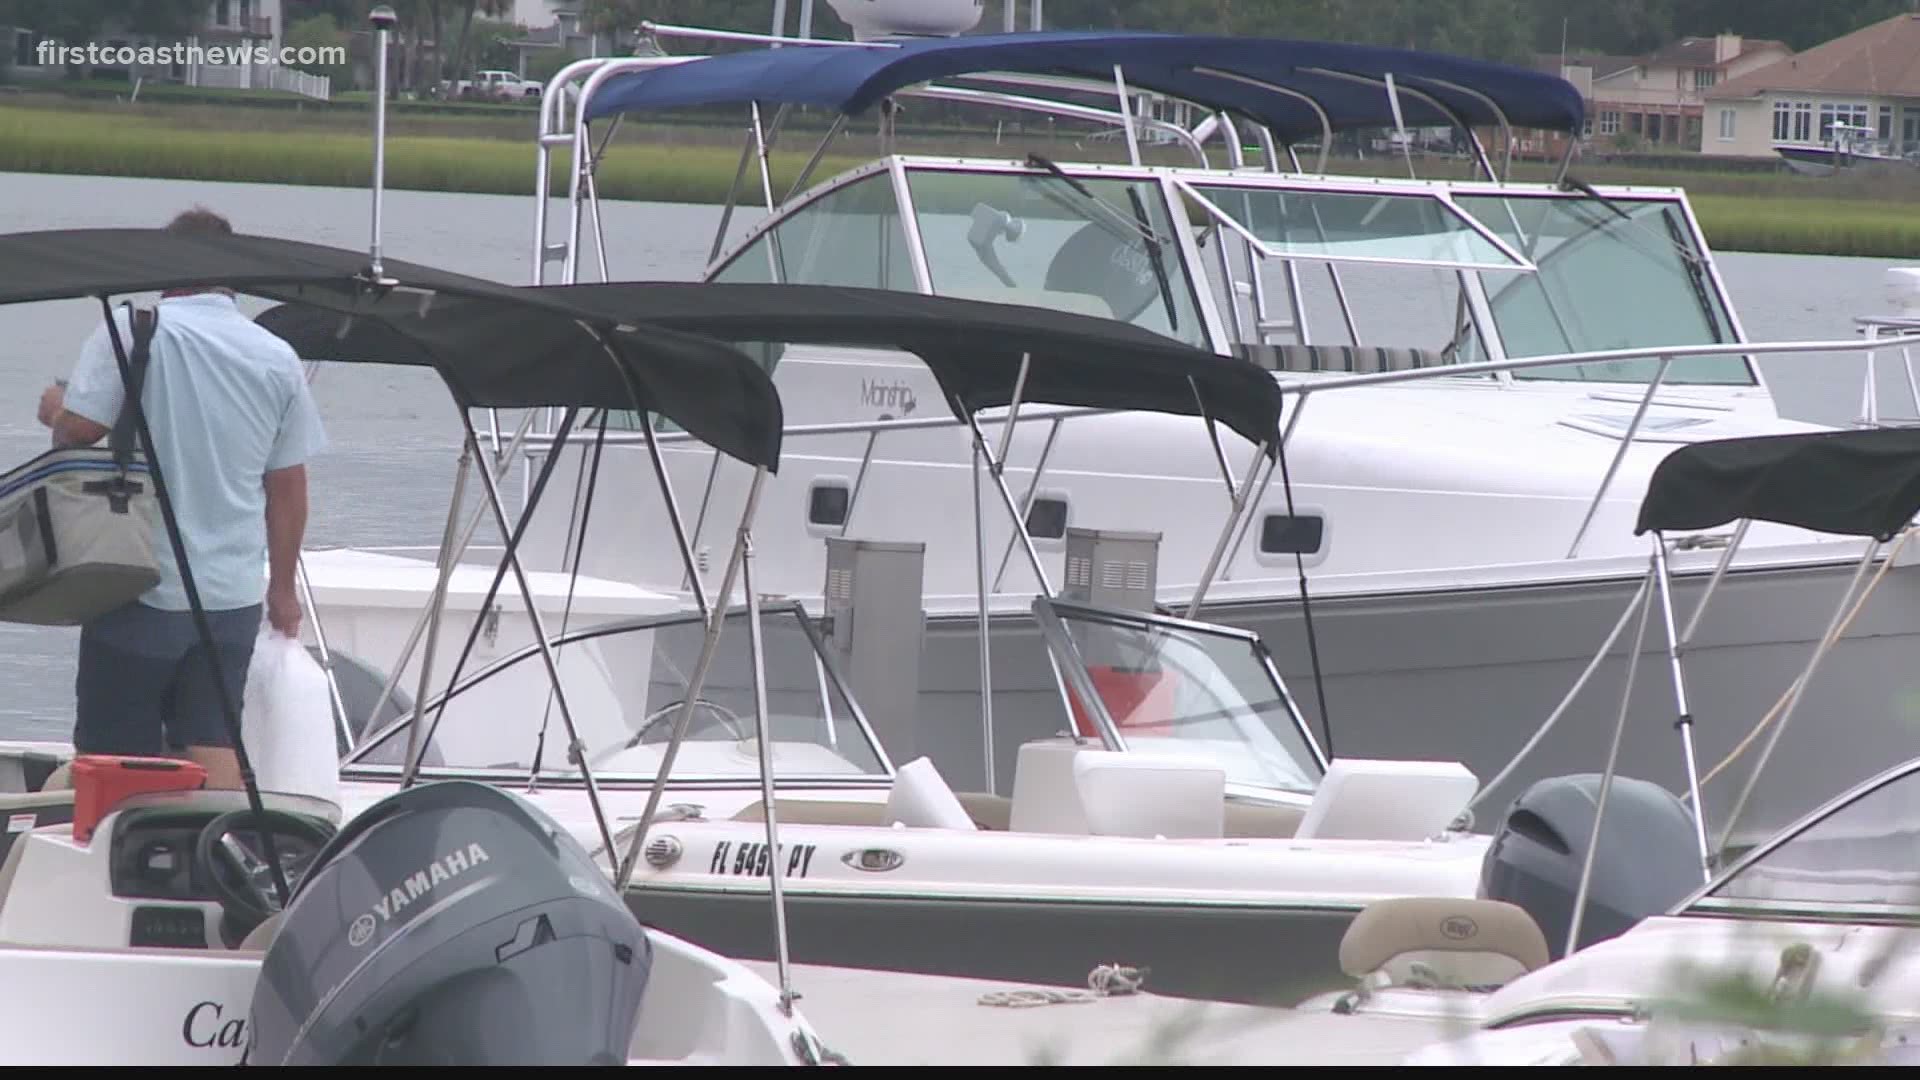 Sales of new boats in May were the highest they've been since 2007, according to the National Marine Manufacturers Association.